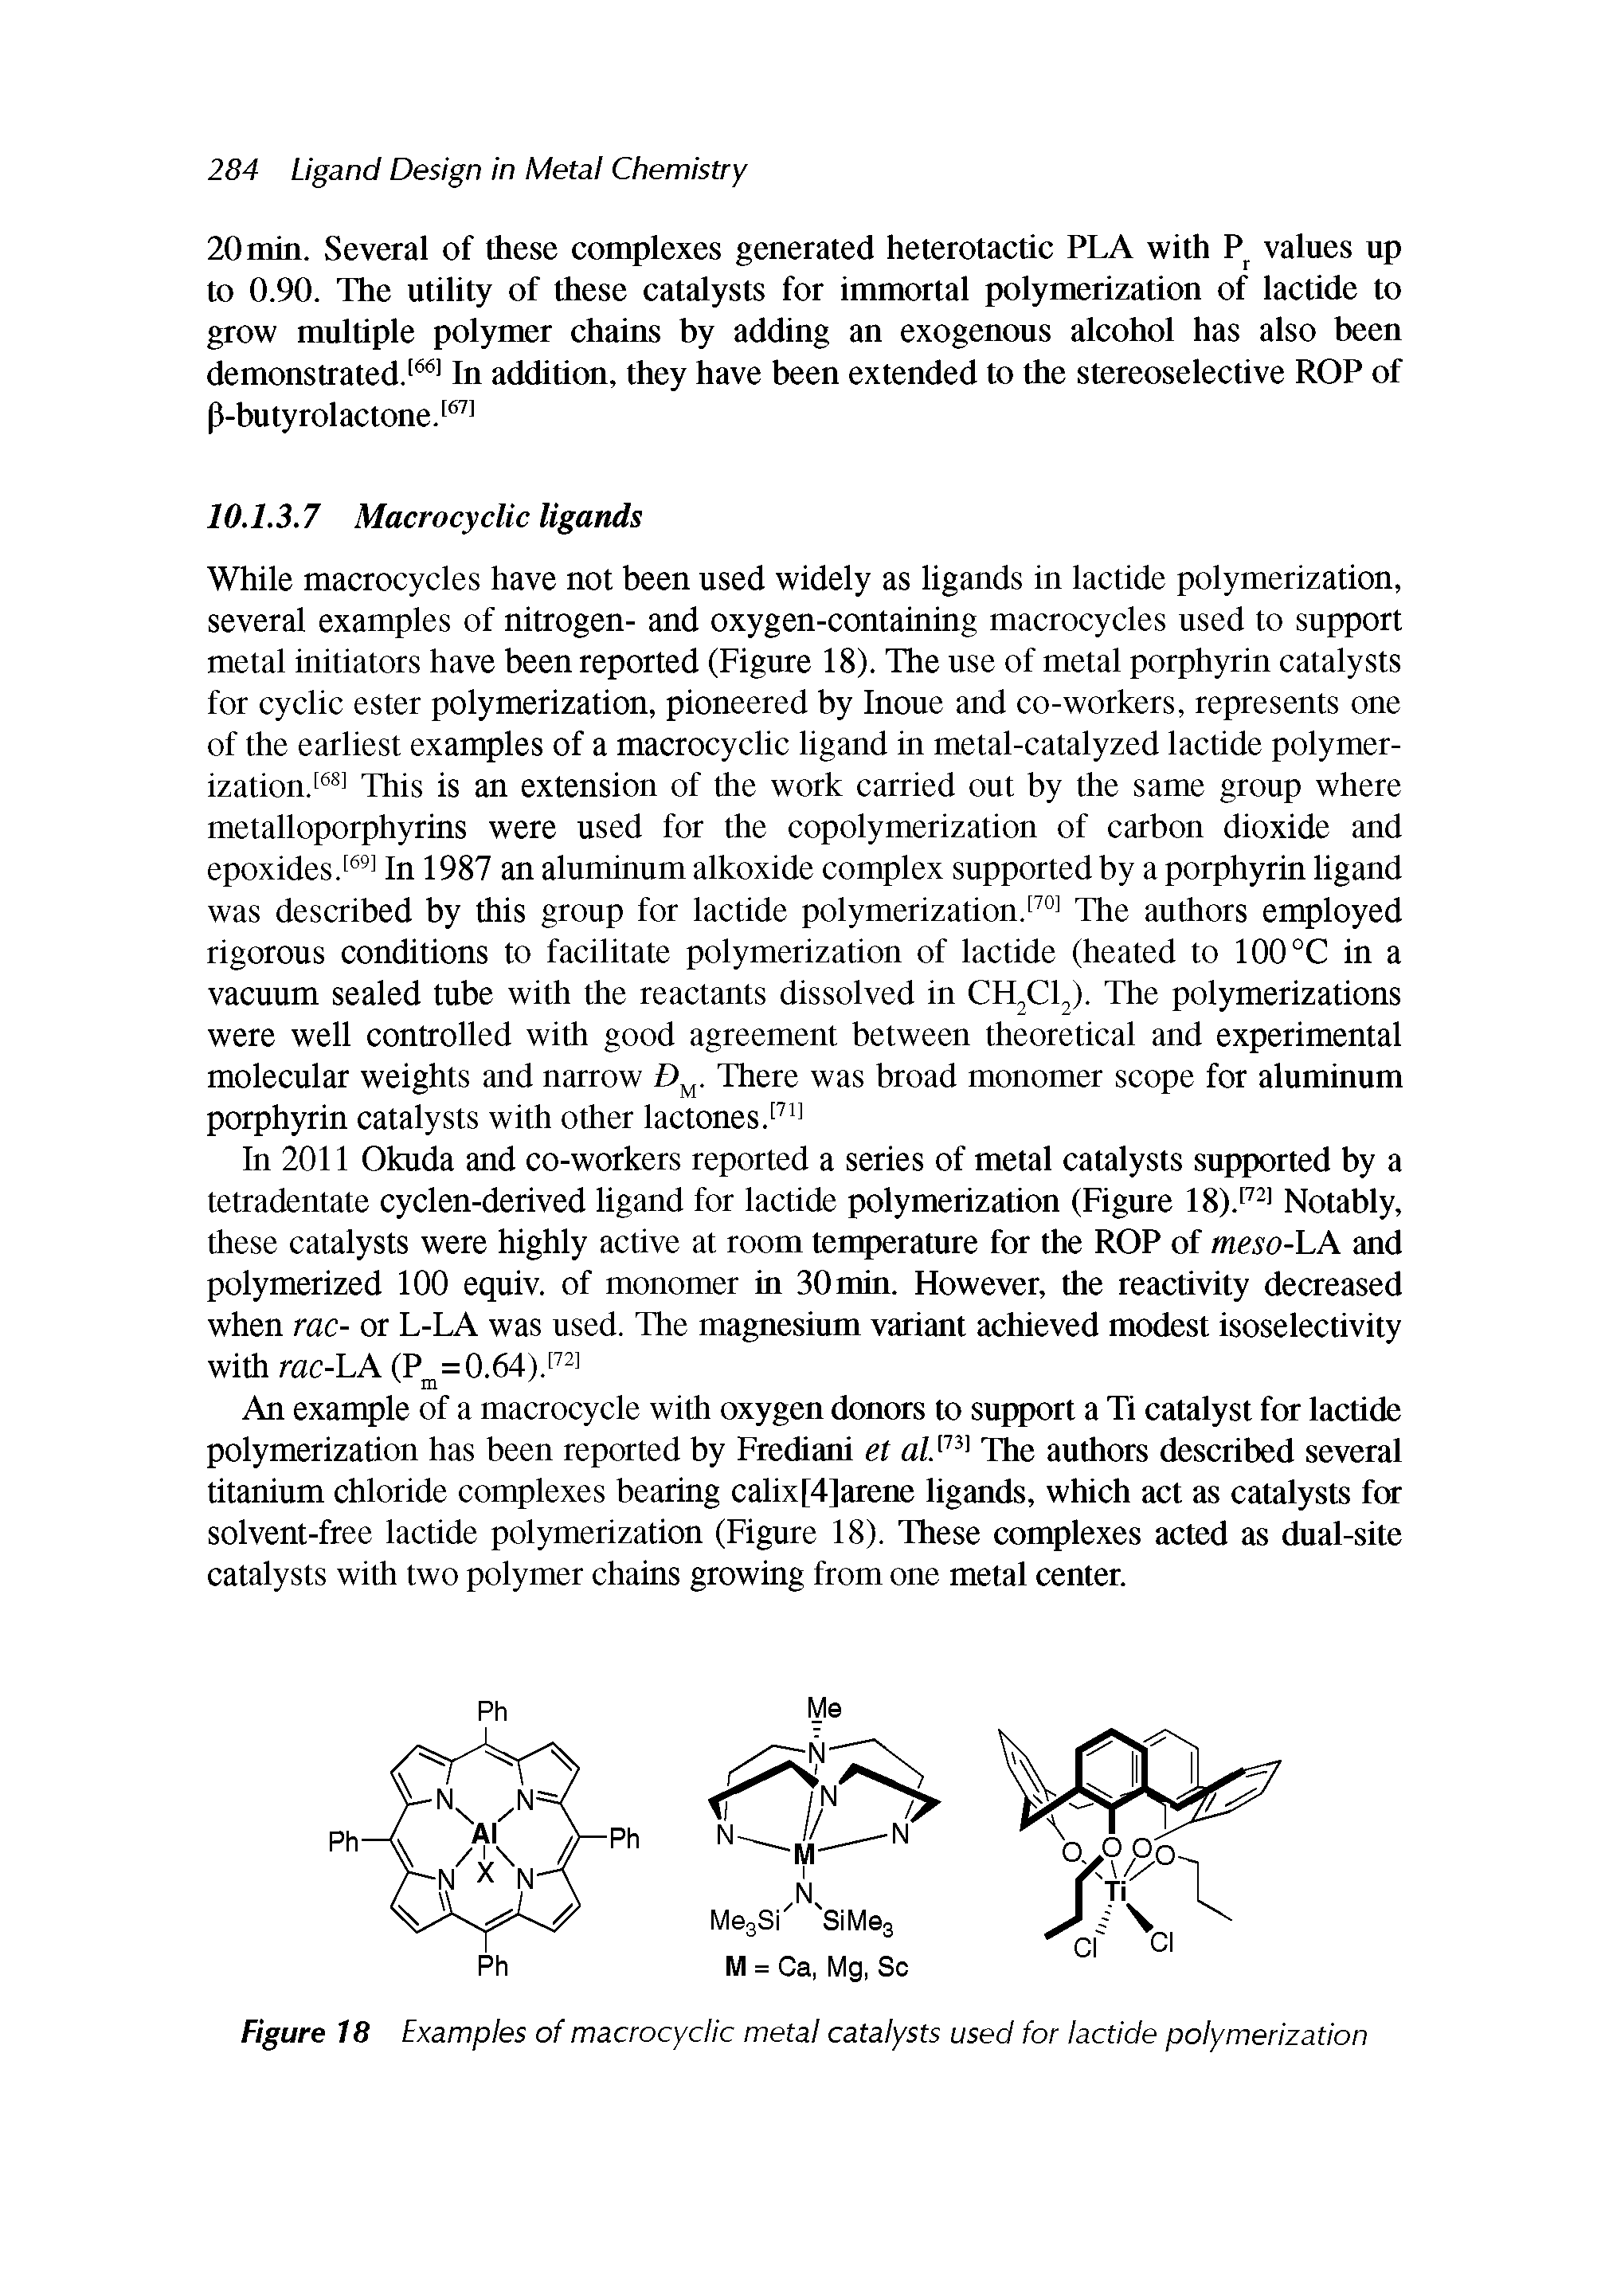 Figure 18 Examples of macrocyclic metal catalysts used for lactide polymerization...